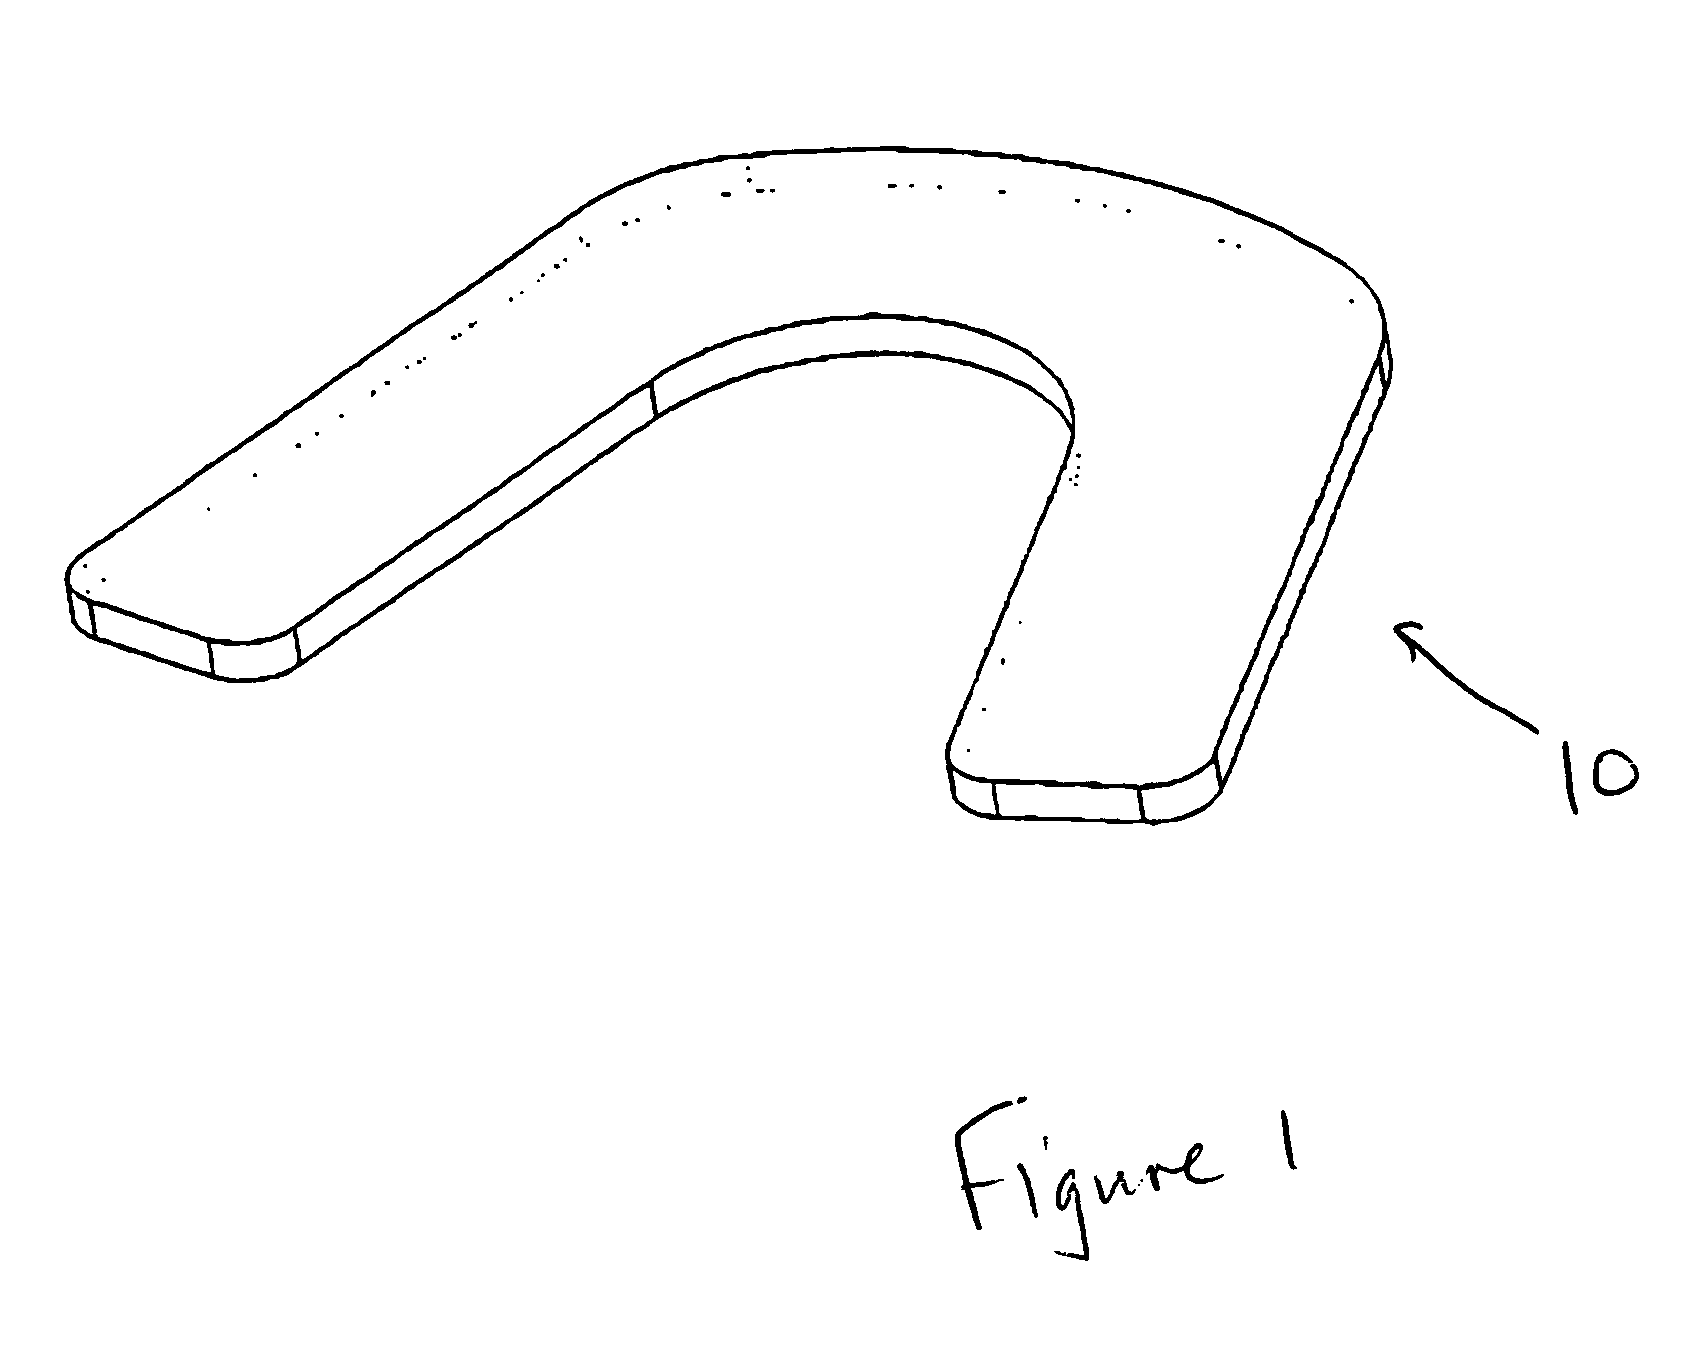 System and method for fabricating an interim dental guard device